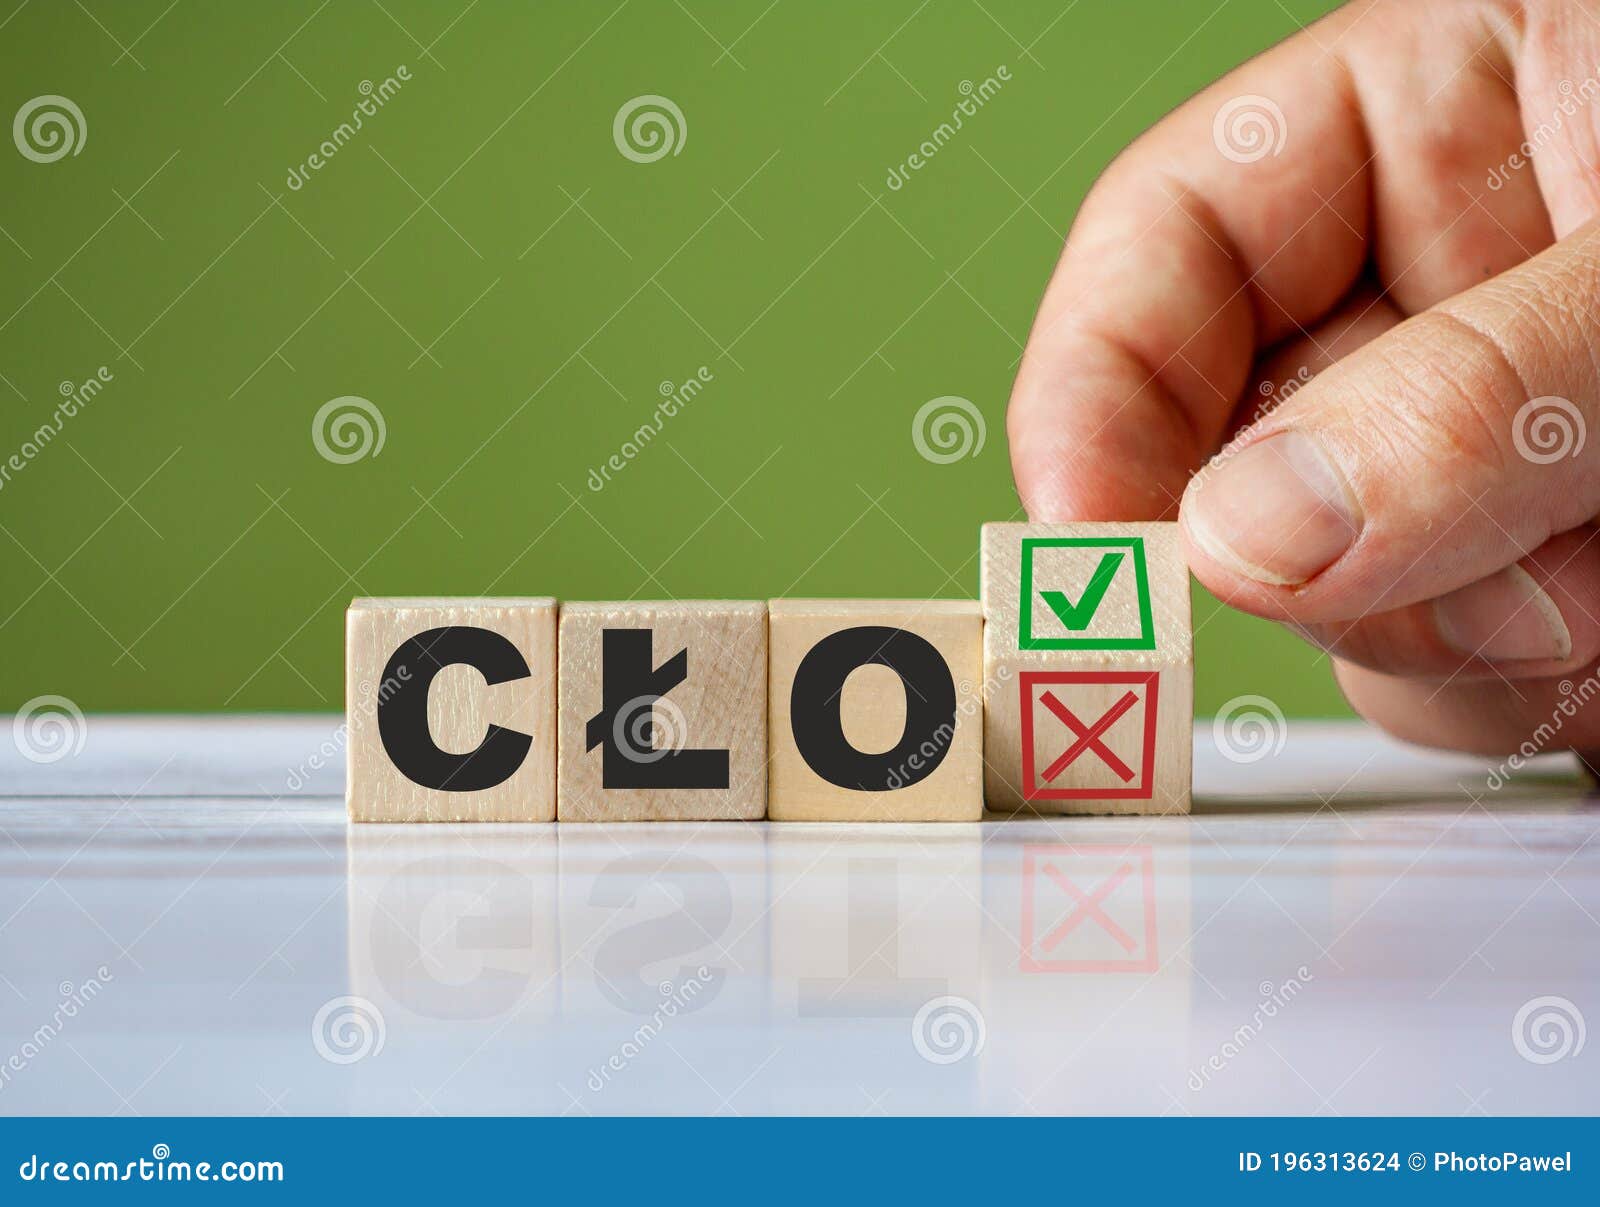 hand turn wooden block with red reject x and green confirm tick as change concept of polish word cÃâo, english duty. word cÃÂo